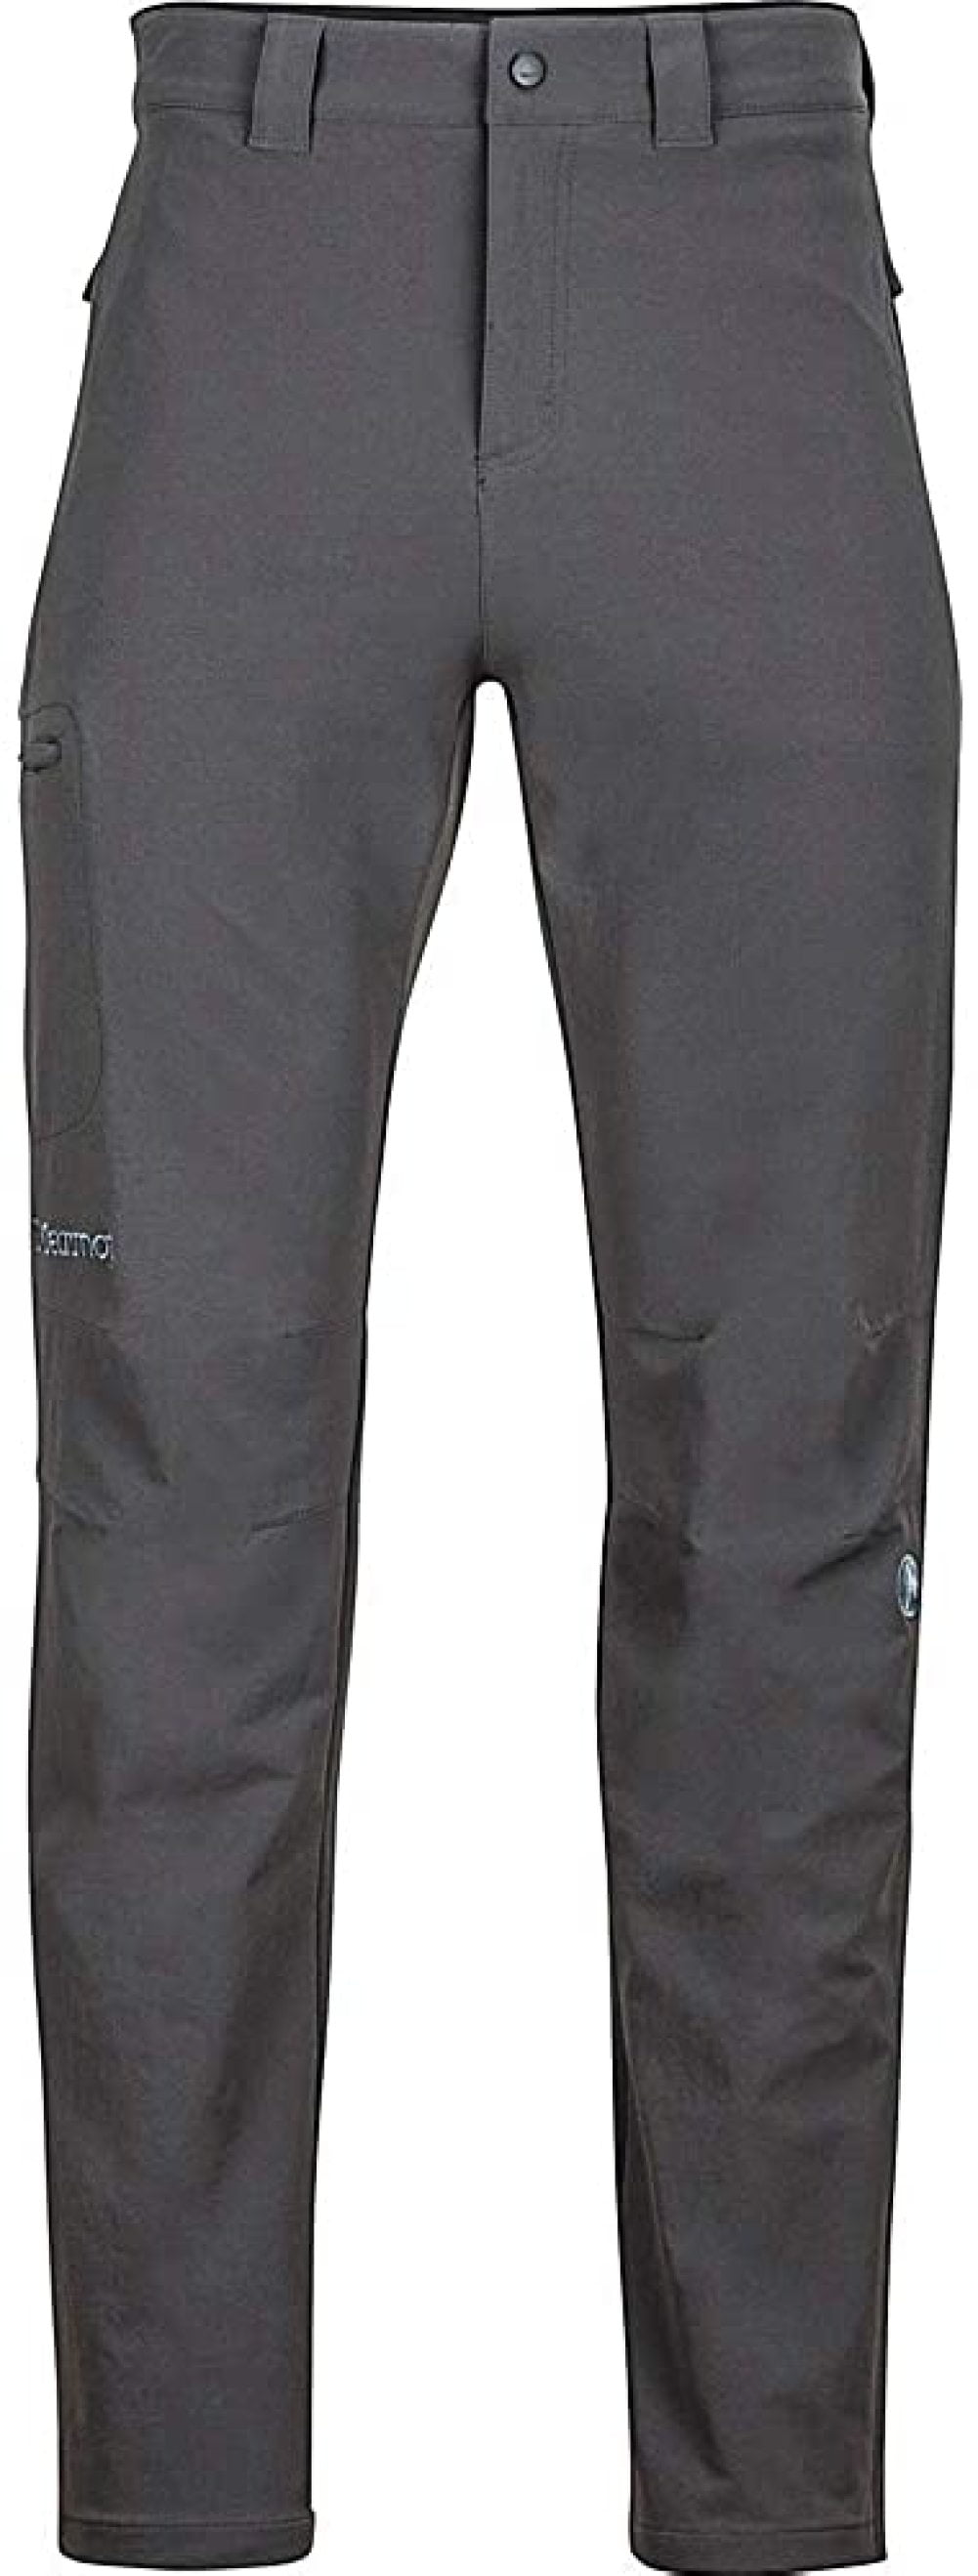 Men Marmot Scree Hiking Trousers Water Resistant & Breathable 